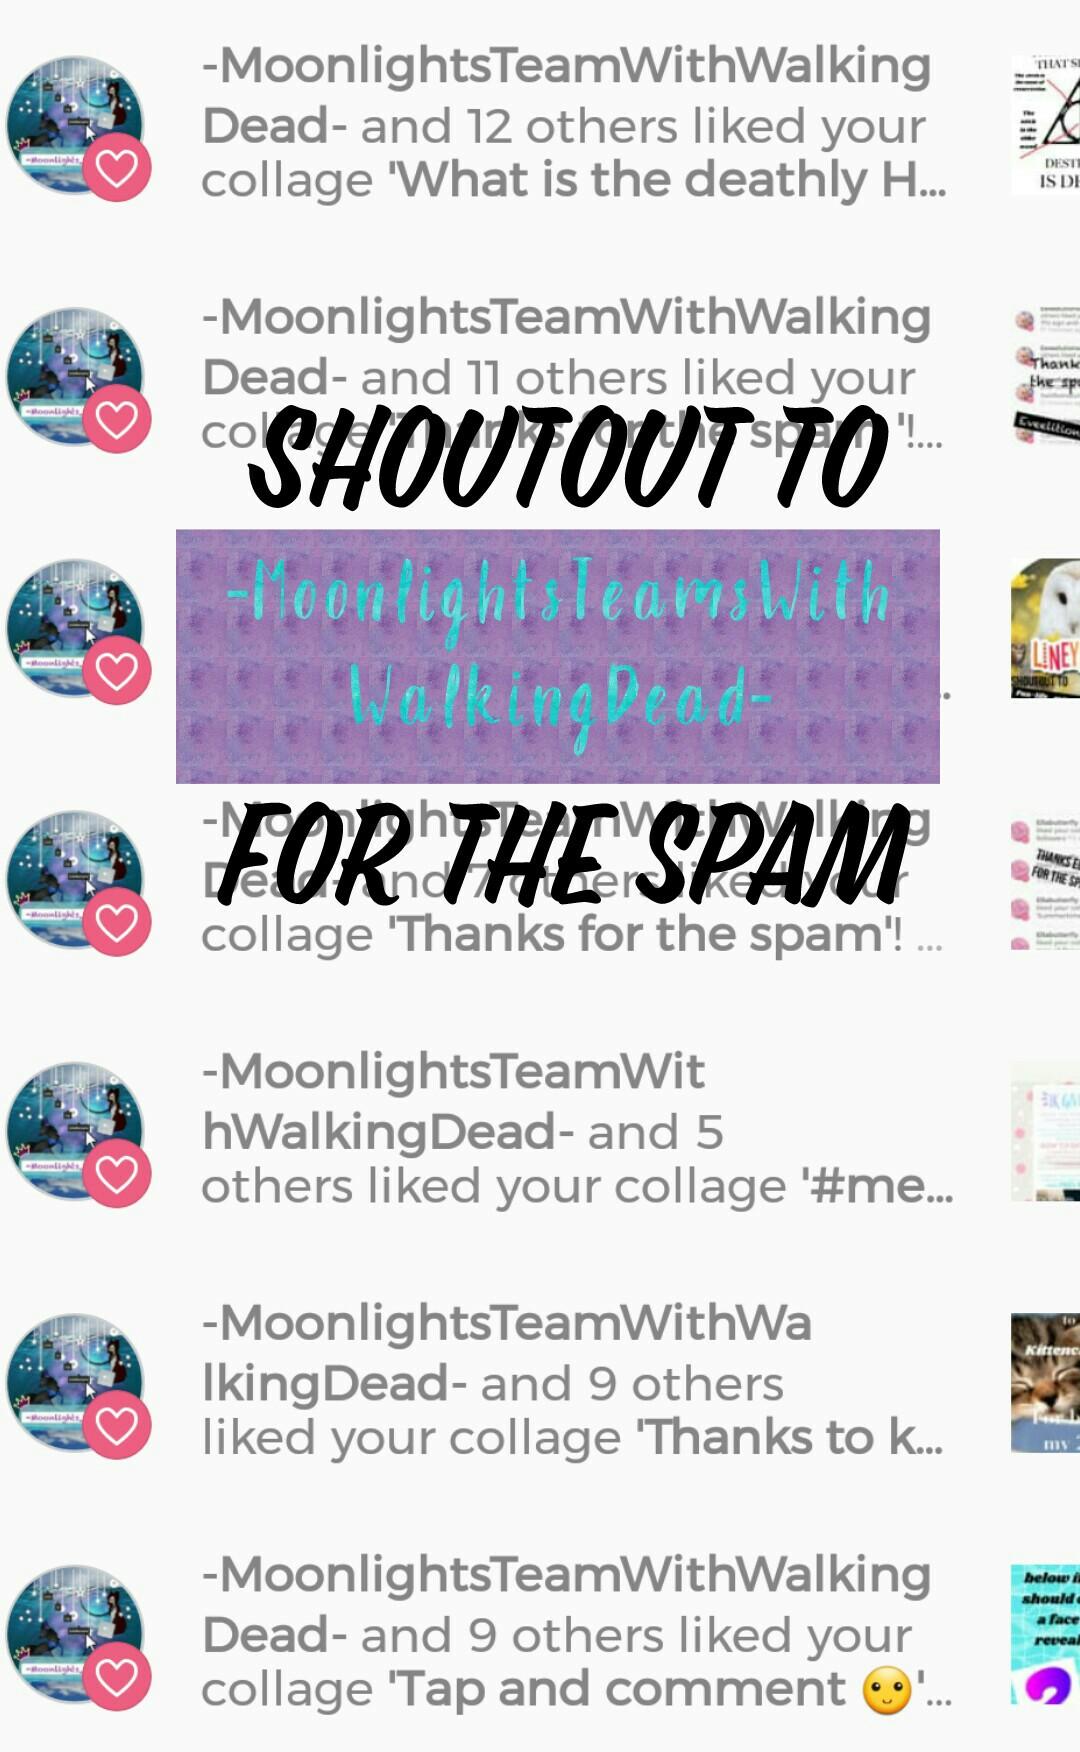 Shoutout to
-MoonlightsTeamsWithWalkingDead-
For the spam